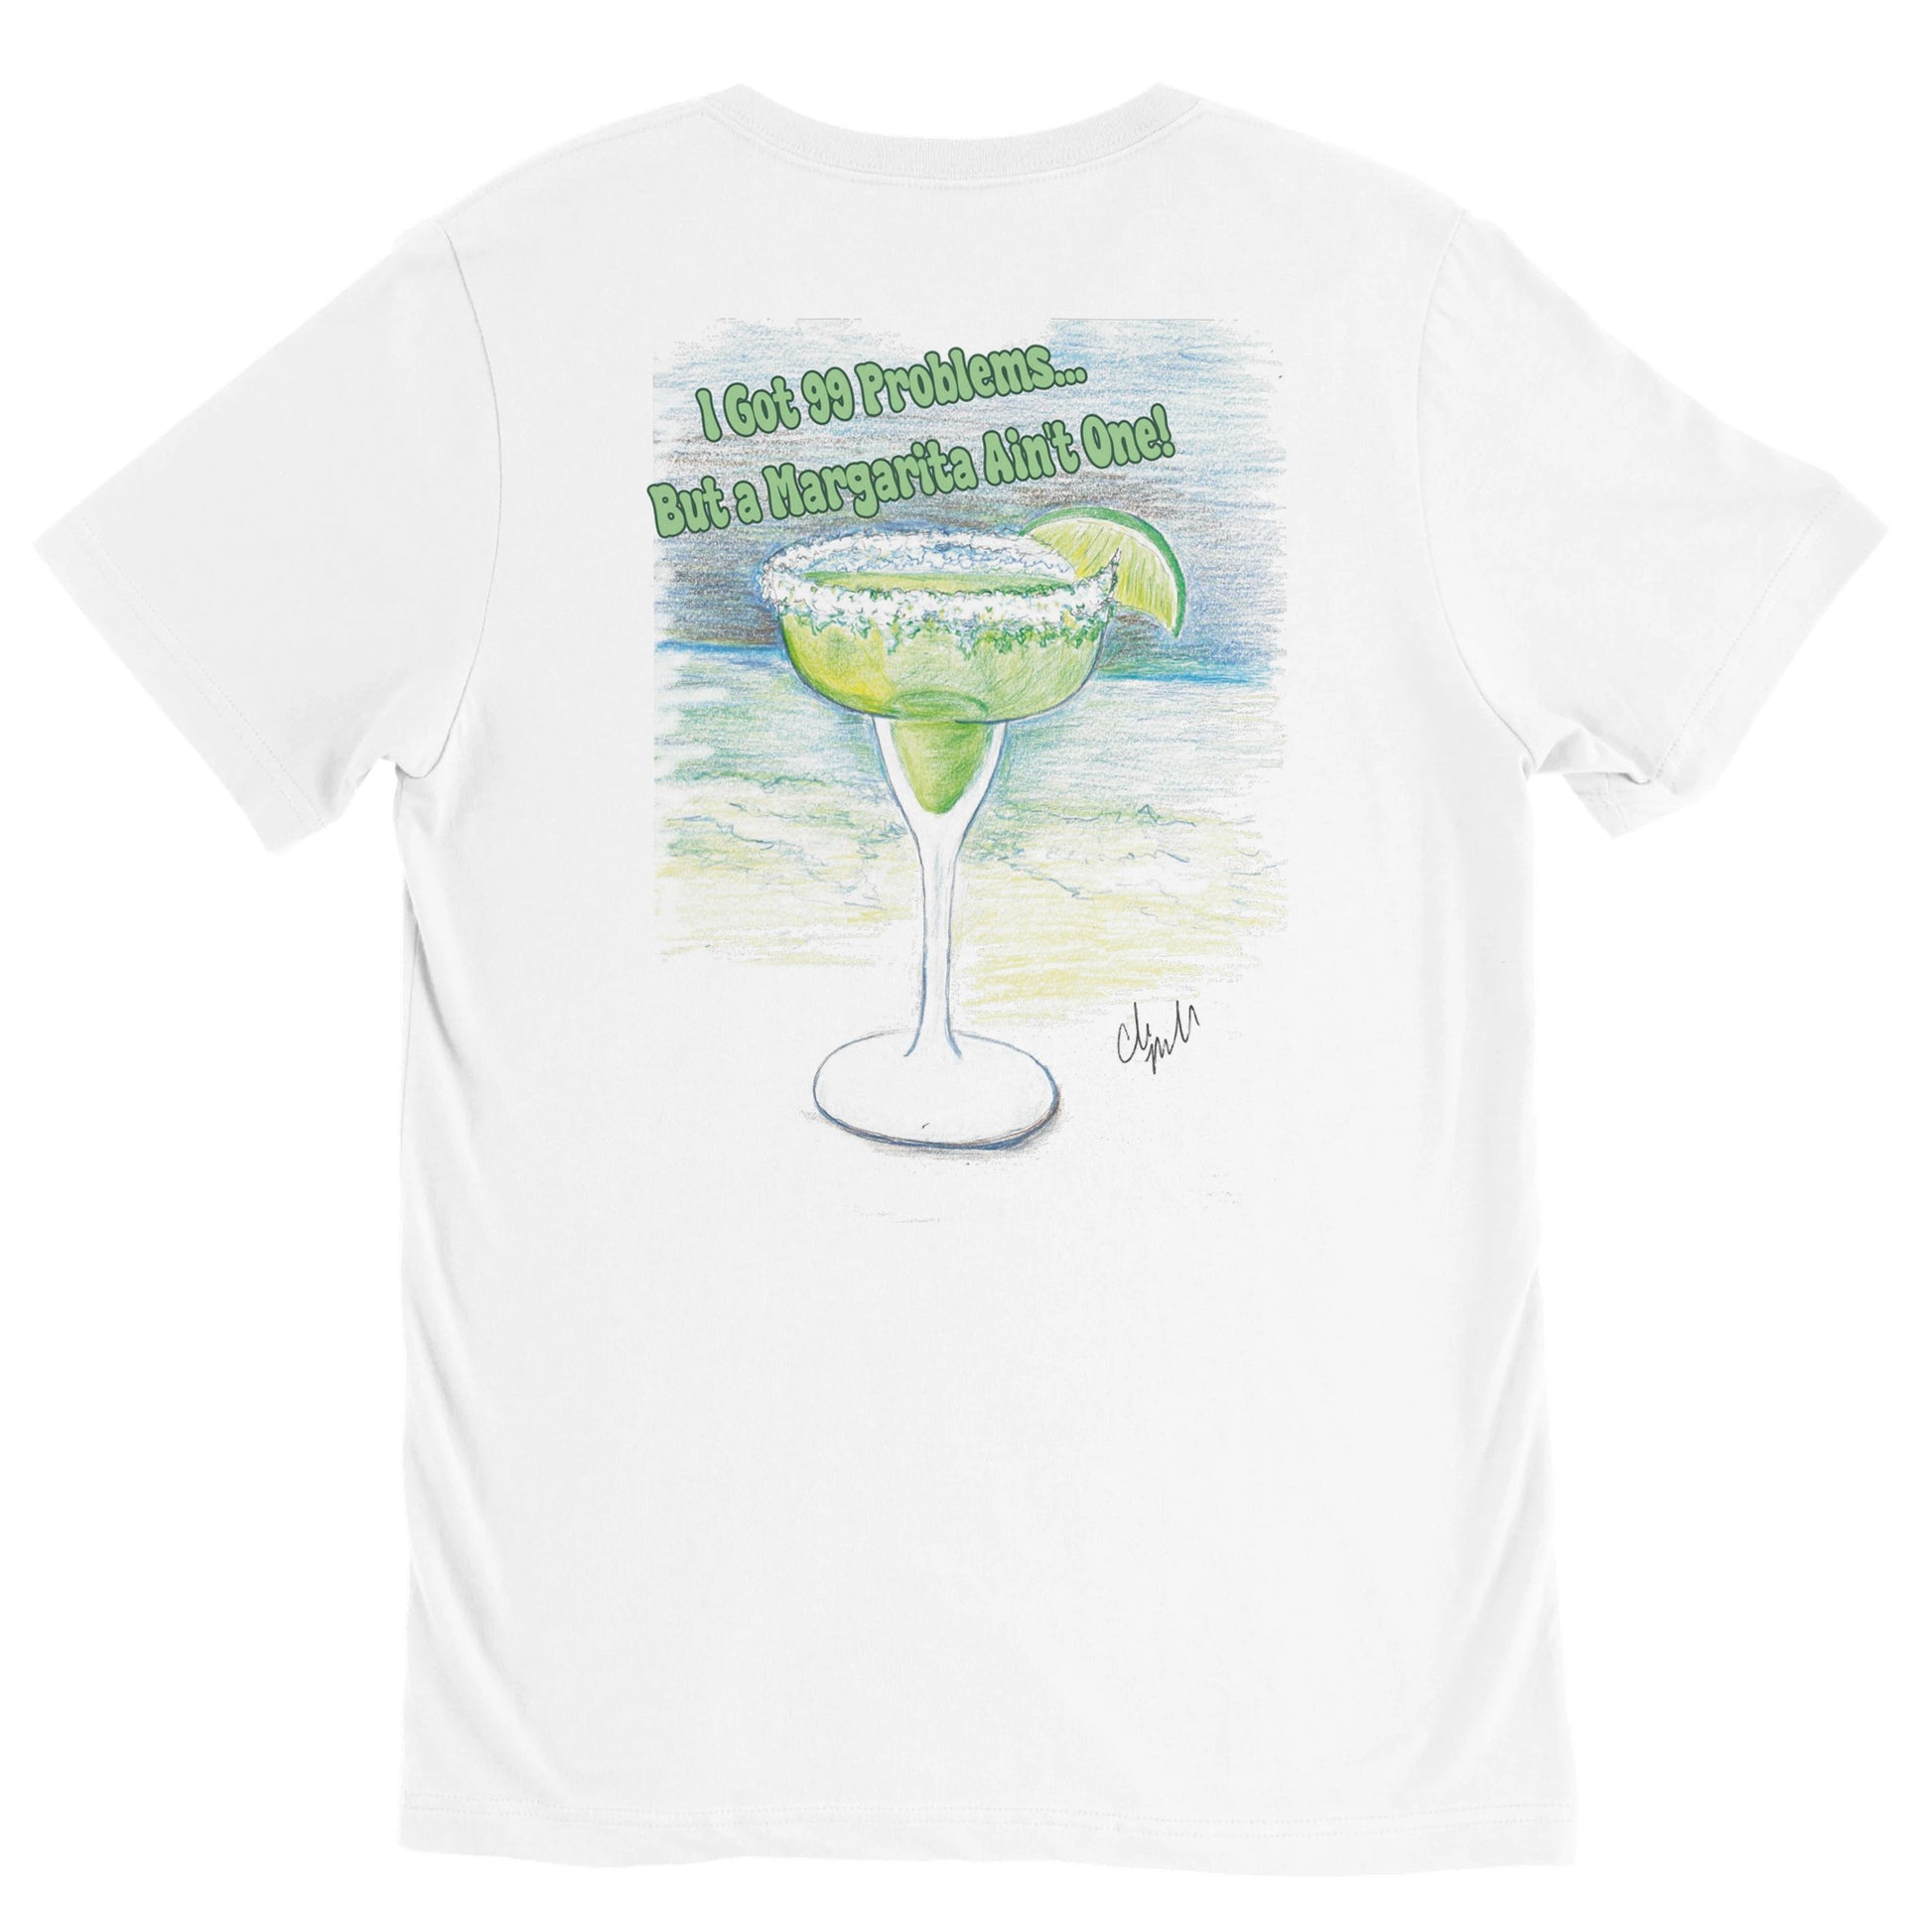 A white premium unisex v-neck t-shirt with original artwork and motto I Got 99 Problems But a Margarita Aint One on back and WhatYa Say logo on front made with combed and ring-spun cotton from WhatYa Say Apparel rear view lying flat. 